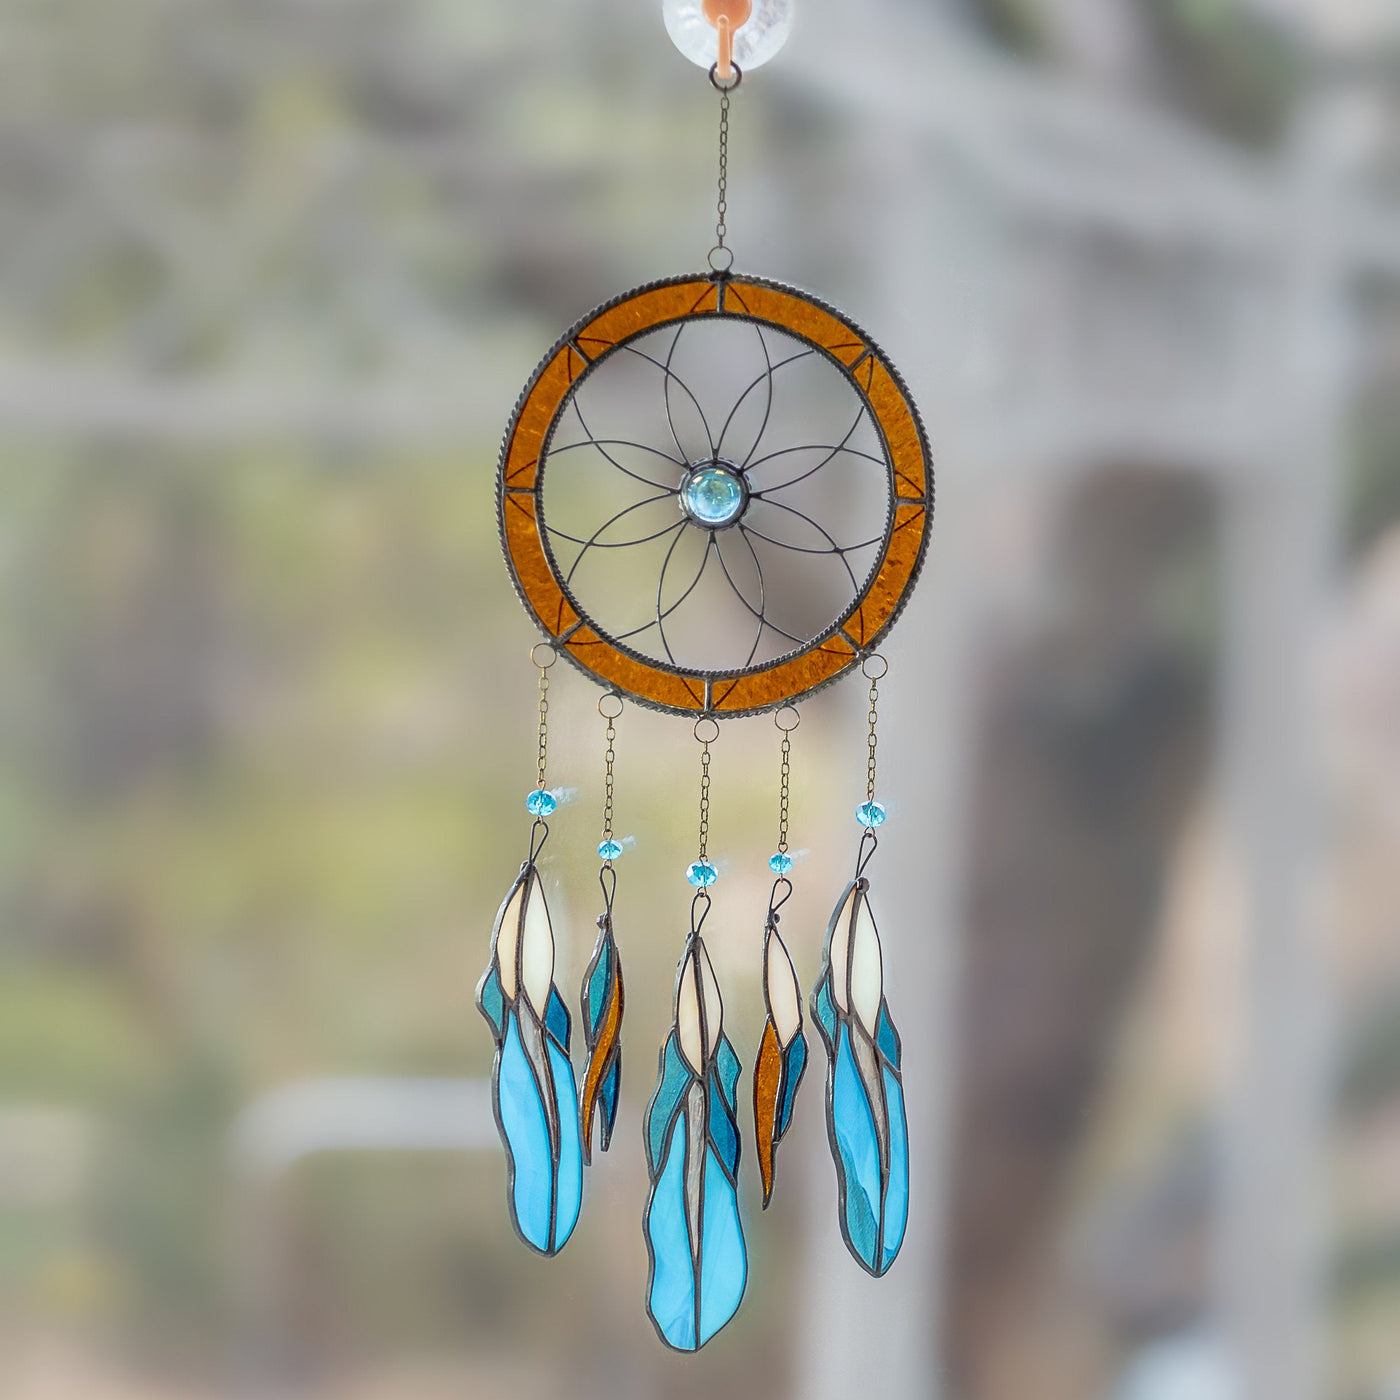 Dreamcatcher of stained glass with blue feathers hanging down